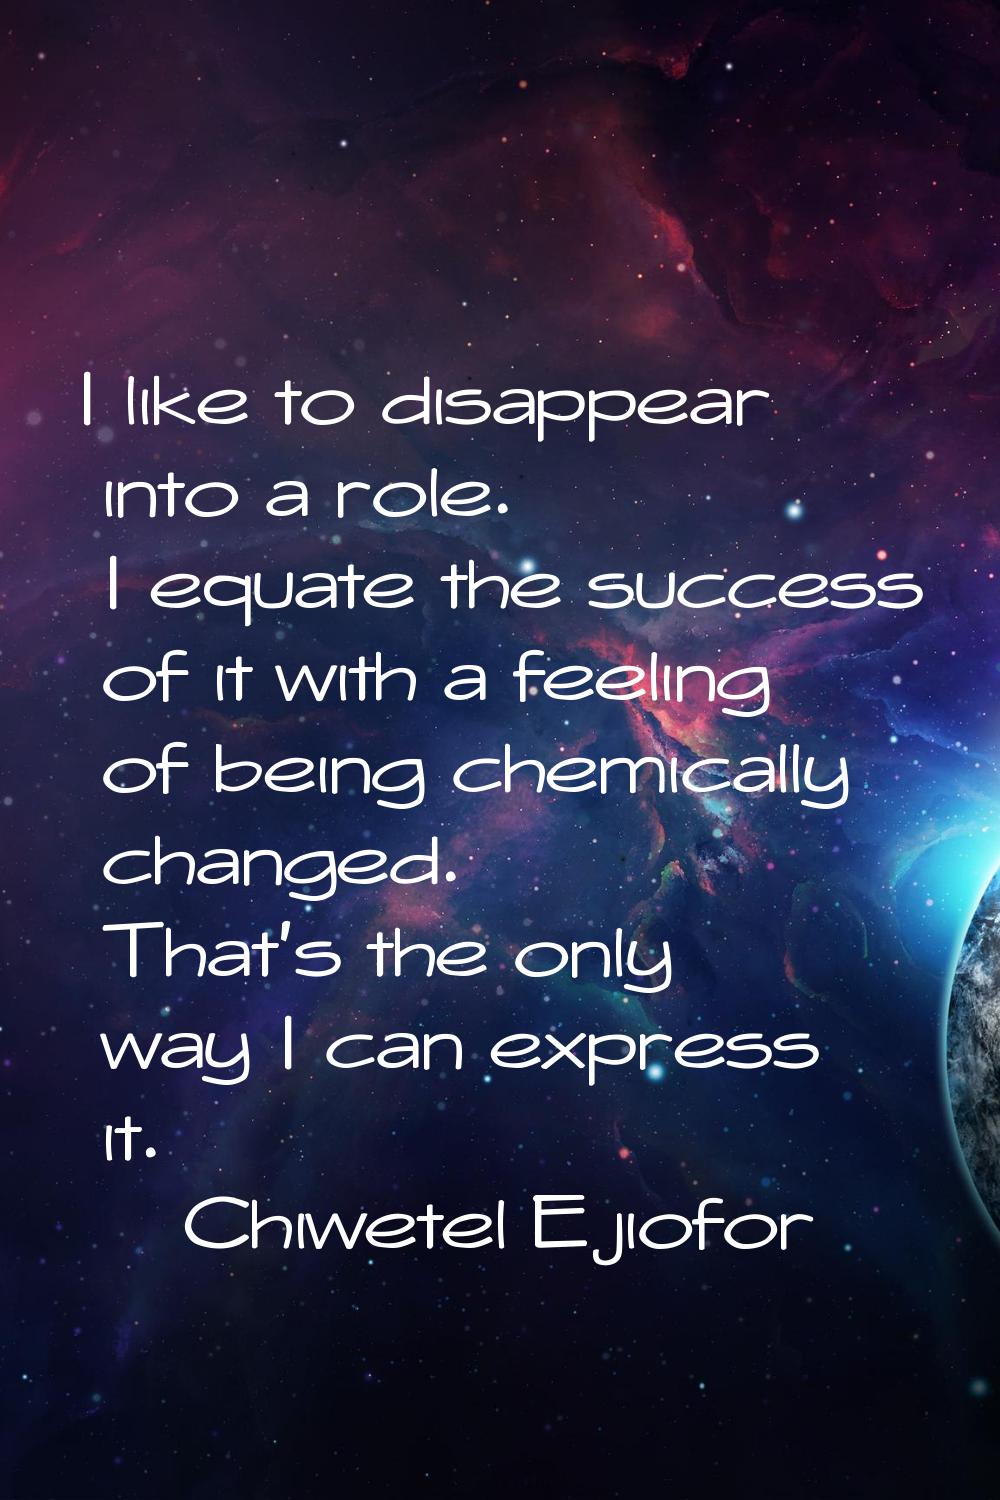 I like to disappear into a role. I equate the success of it with a feeling of being chemically chan